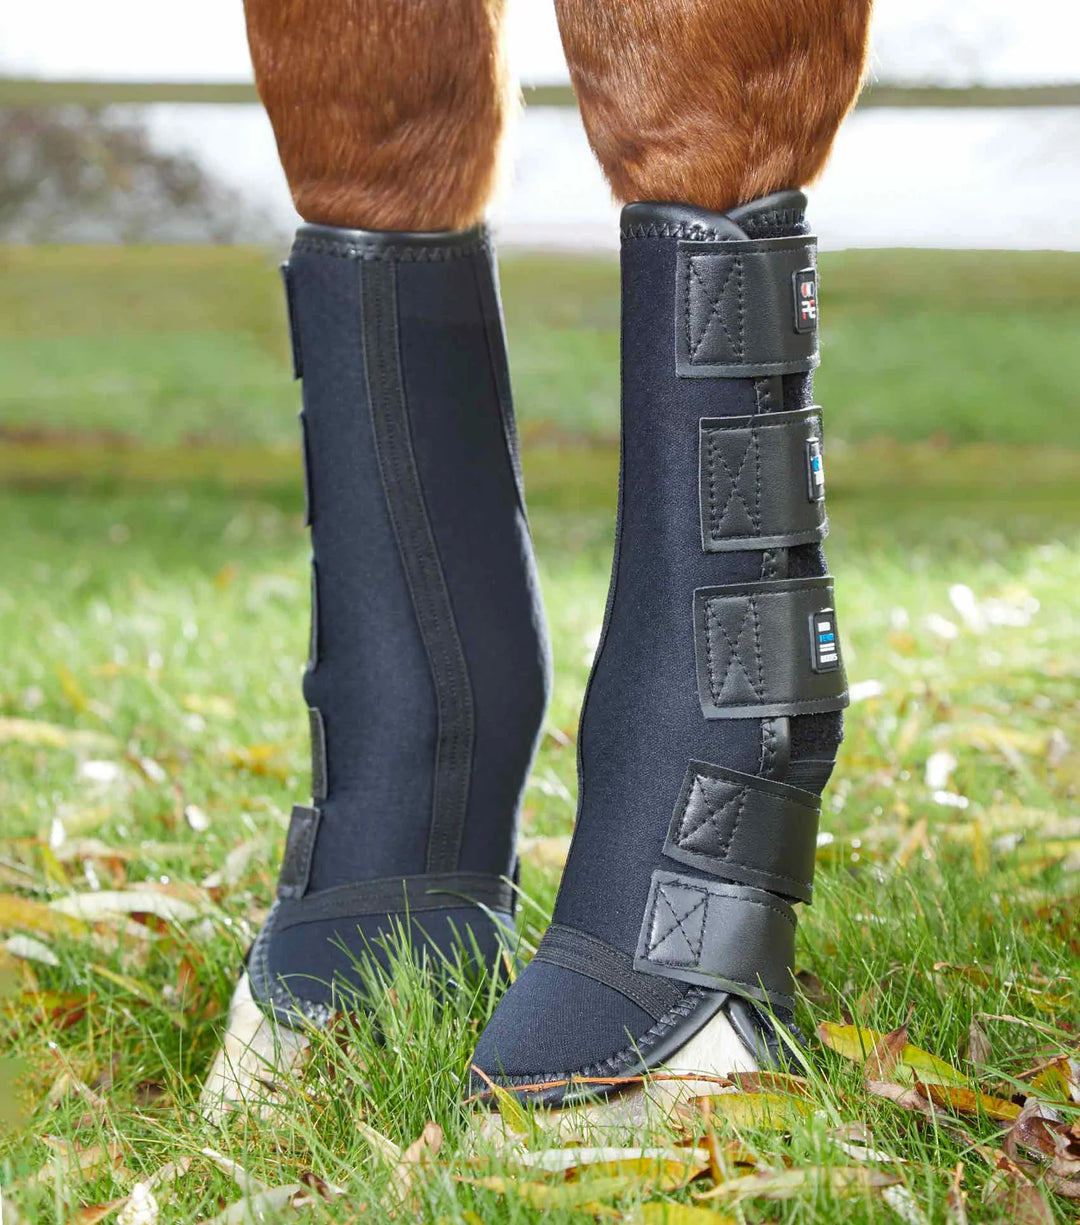 Woof Wear Mud Fever Turnout Boots